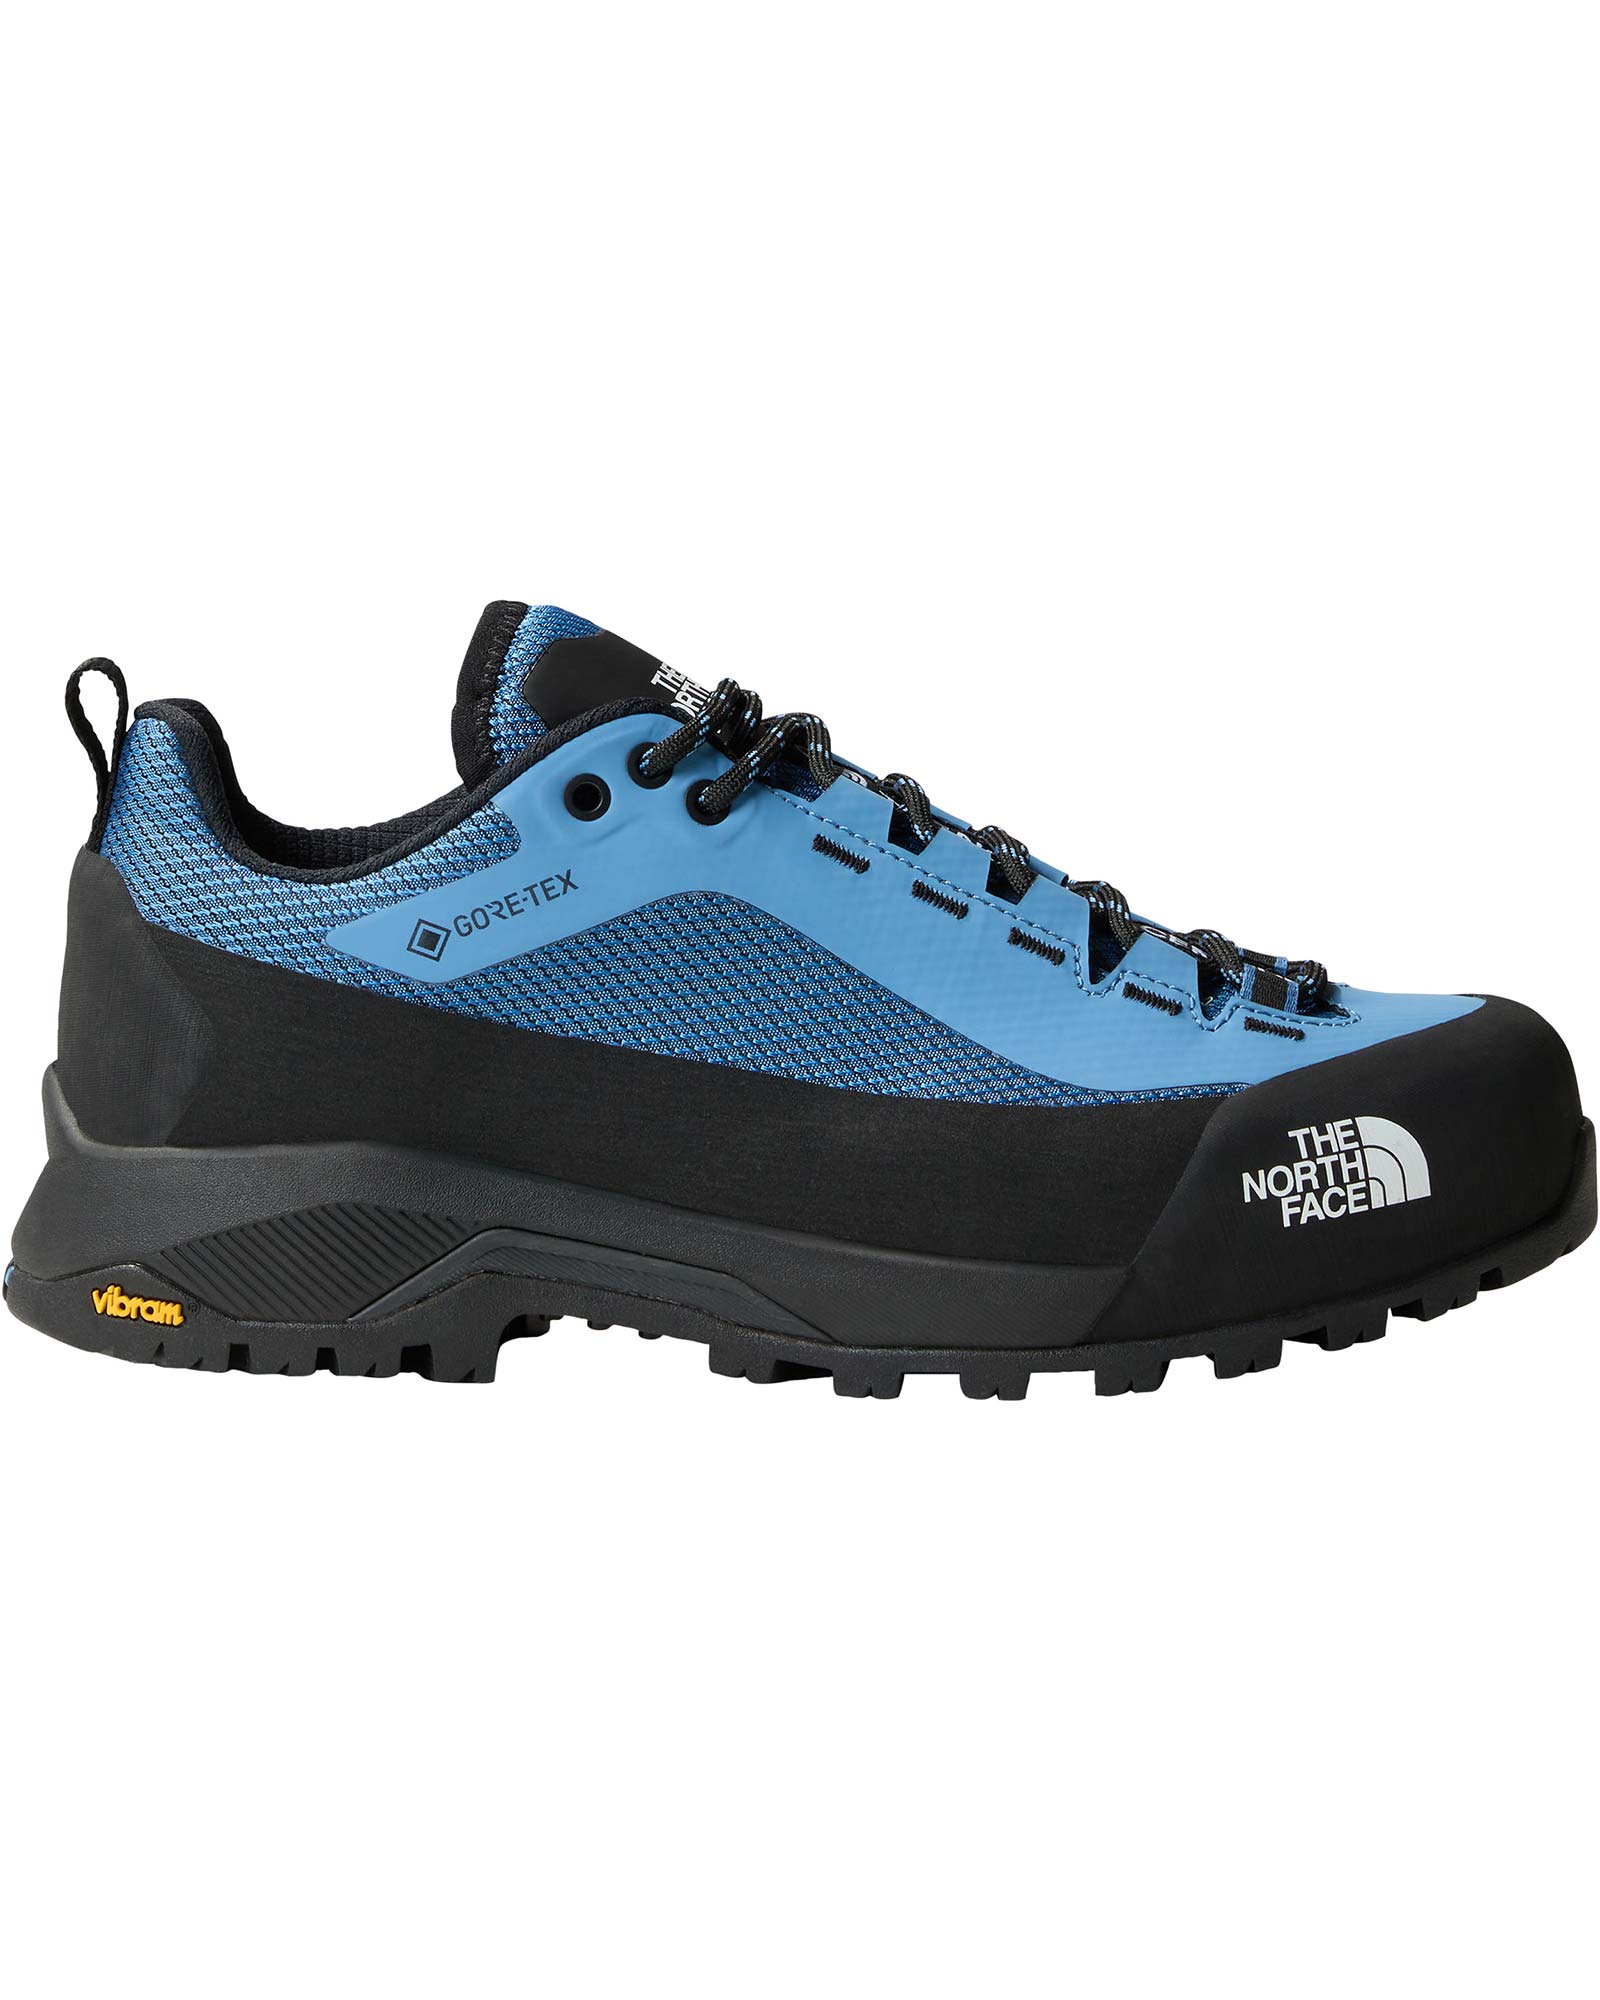 The North Face Verto Alpine GORE-TEX Women's Walking Shoes 0